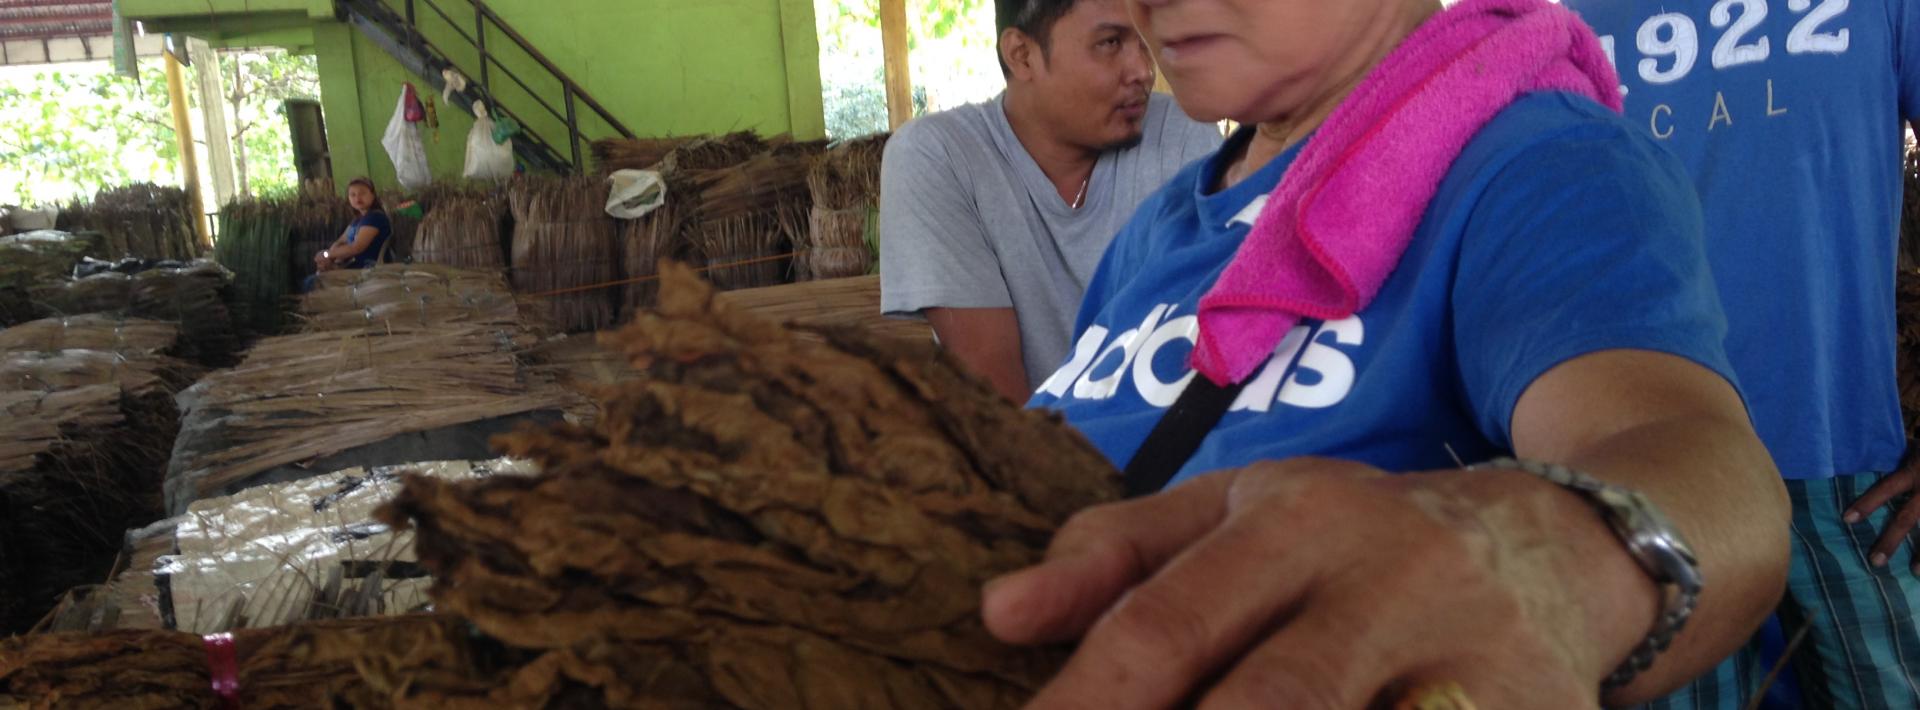 Part 1: Romancing storms, worms and leaves; growing tobacco in the shadow of environmental perils in the Philippines